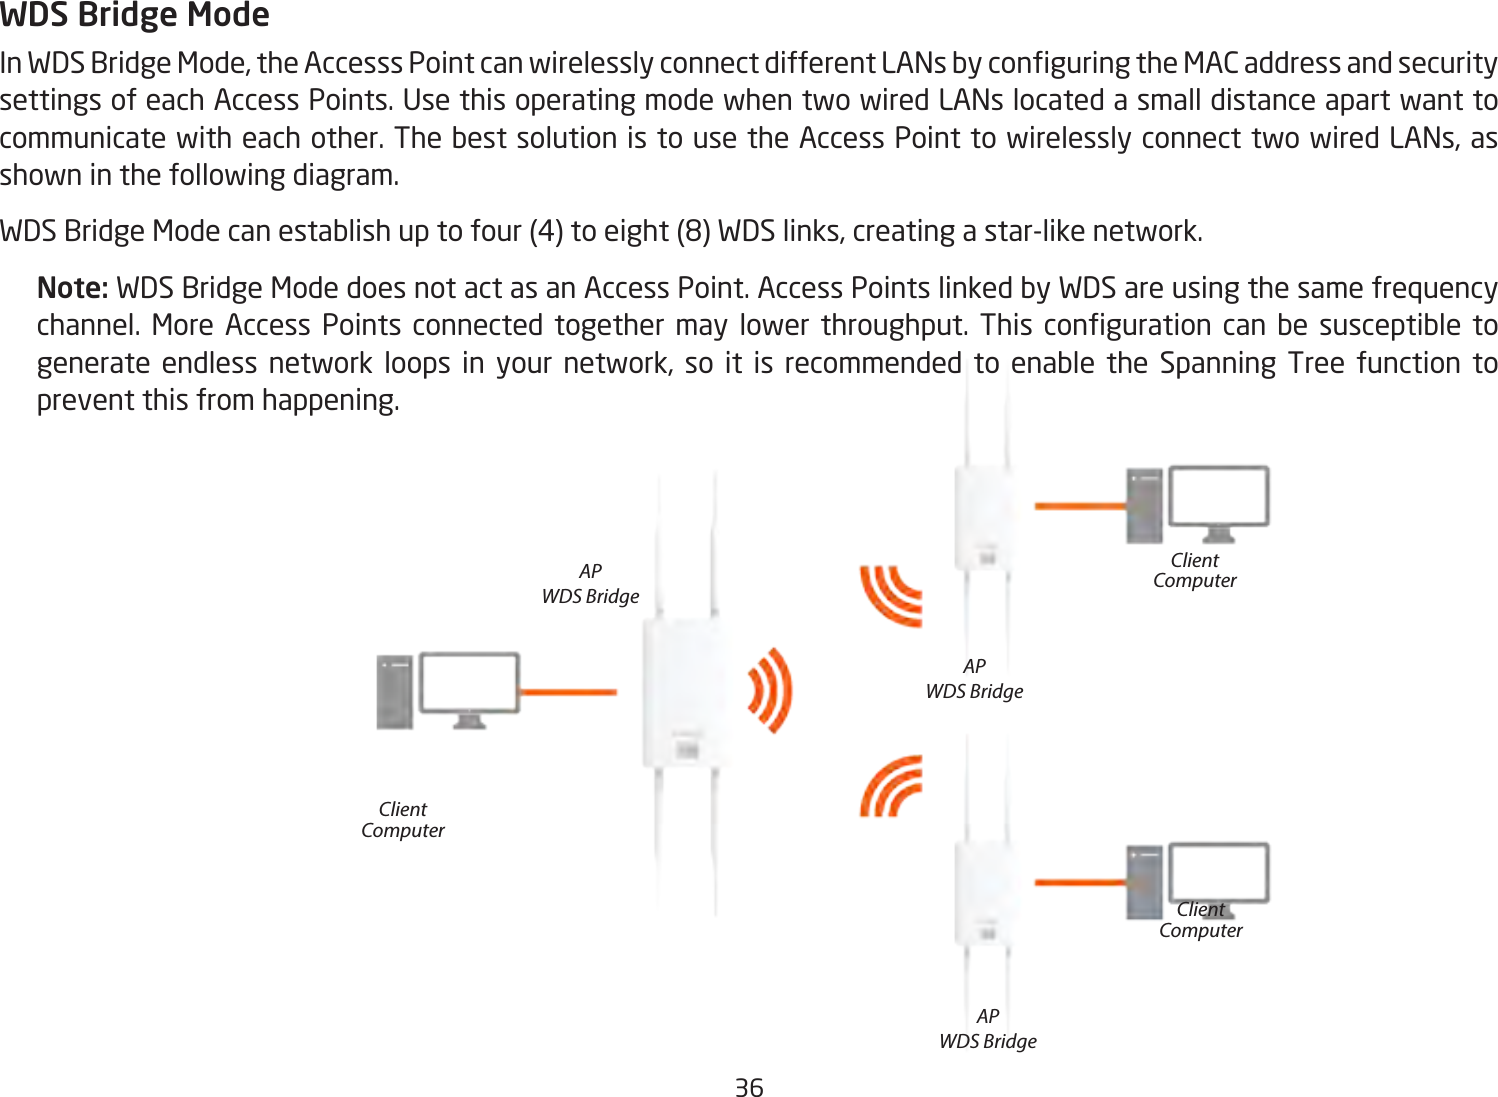 36WDS Bridge ModeInWDSBridgeMode,theAccesssPointcanwirelesslyconnectdifferentLANsbyconguringtheMACaddressandsecuritysettingsofeachAccessPoints.UsethisoperatingmodewhentwowiredLANslocatedasmalldistanceapartwanttocommunicatewitheachother.ThebestsolutionistousetheAccessPointtowirelesslyconnecttwowiredLANs,asshown in the following diagram. WDSBridgeModecanestablishuptofour(4)toeight(8)WDSlinks,creatingastar-likenetwork.Note: WDS Bridge Mode does not act as an Access Point. Access Points linked by WDS are using the same frequency channel. More Access Points connected together may lower throughput. This conguration can be susceptible togenerate endless network loops in your network, so it is recommended to enable the Spanning Tree function toprevent this from happening.APWDS BridgeAPWDS BridgeAPWDS BridgeClientComputerClientComputerClientComputer